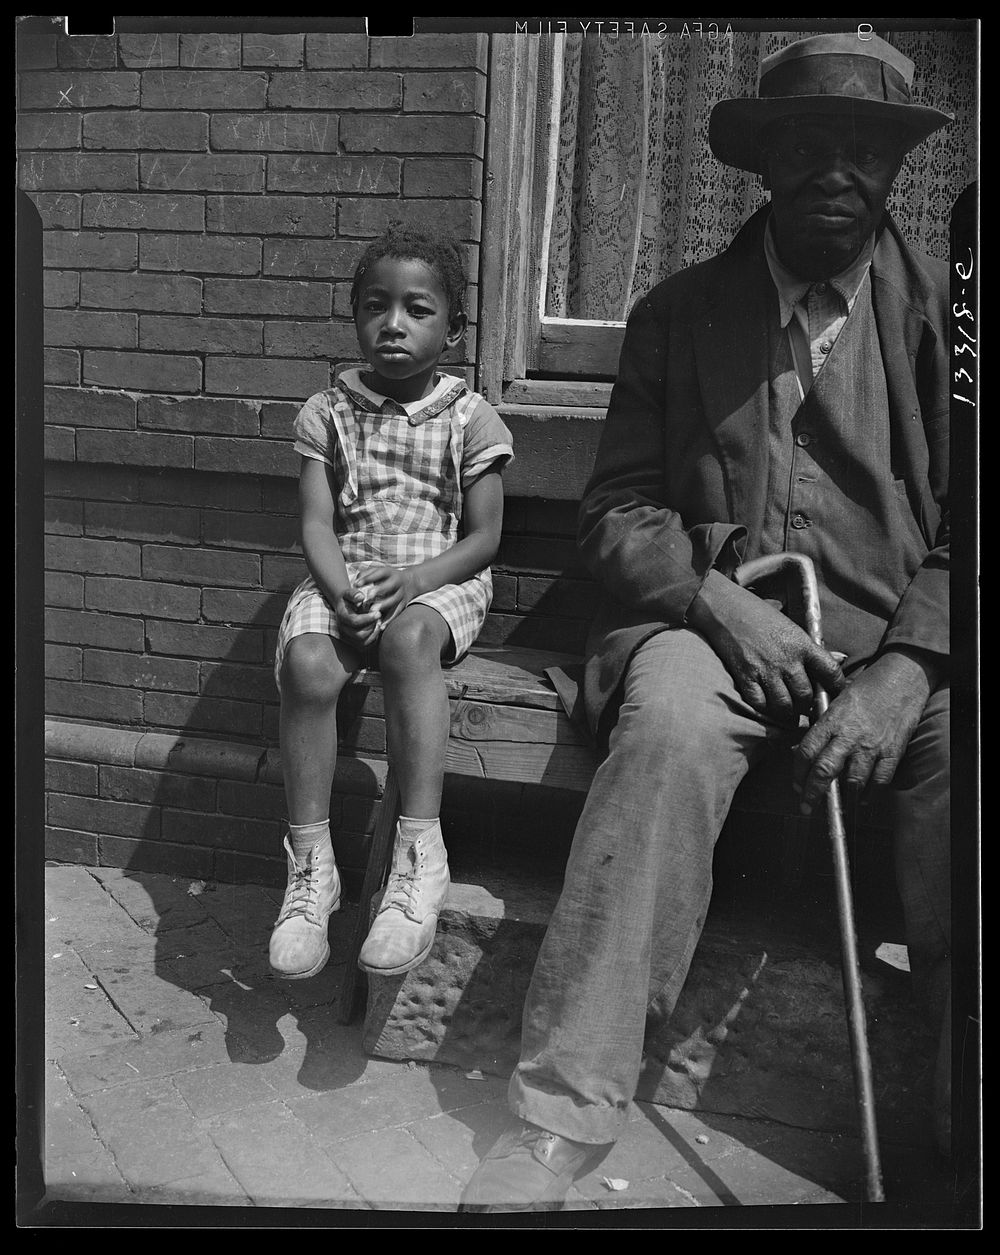 Washington, D.C. Grandfather and grandchild who live on Seaton Road. Sourced from the Library of Congress.